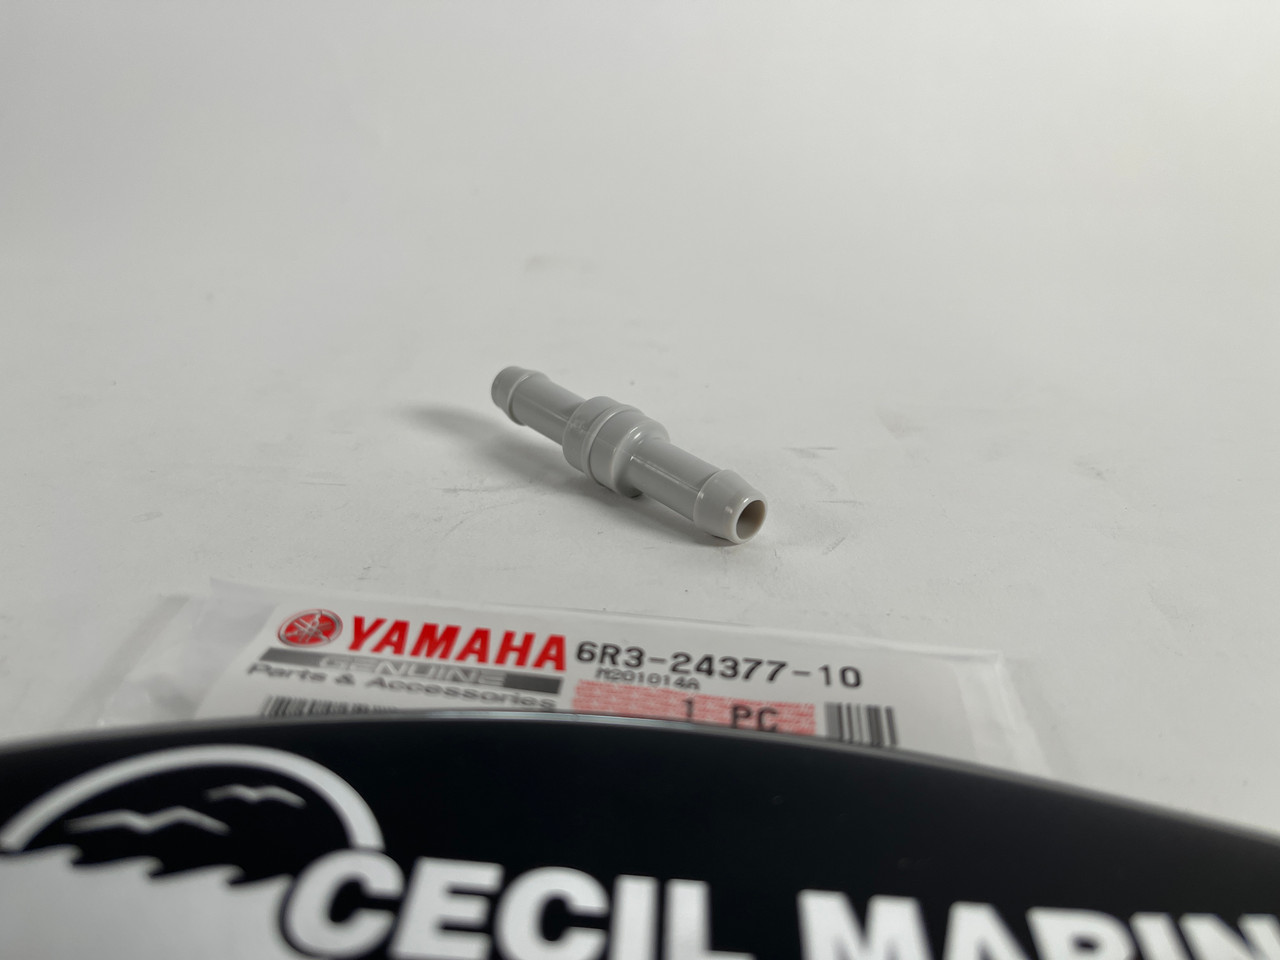 $5.99* GENUINE YAMAHA no tax* PIPE, JOINT 3 6R3-24377-10-00 *In Stock & Ready To Ship